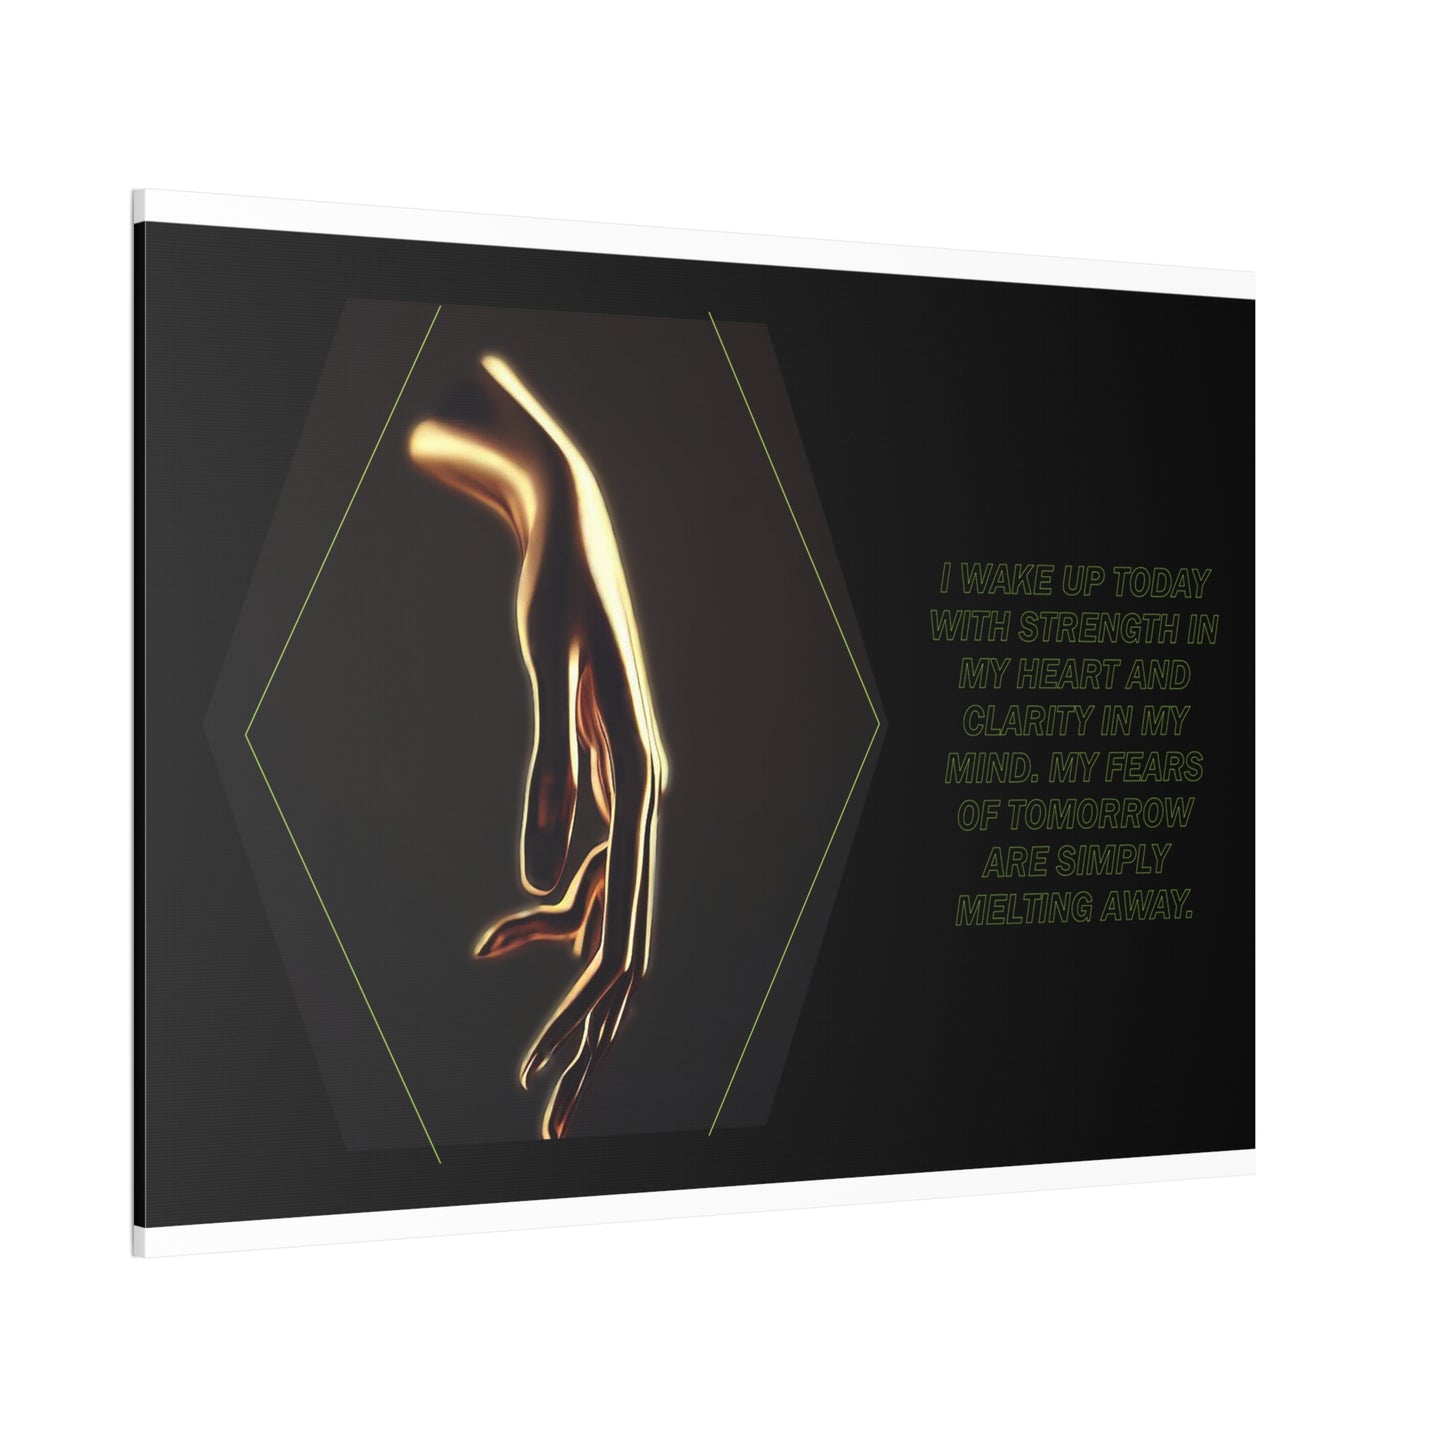 Strength and Serenity - Affirmation Wall Art